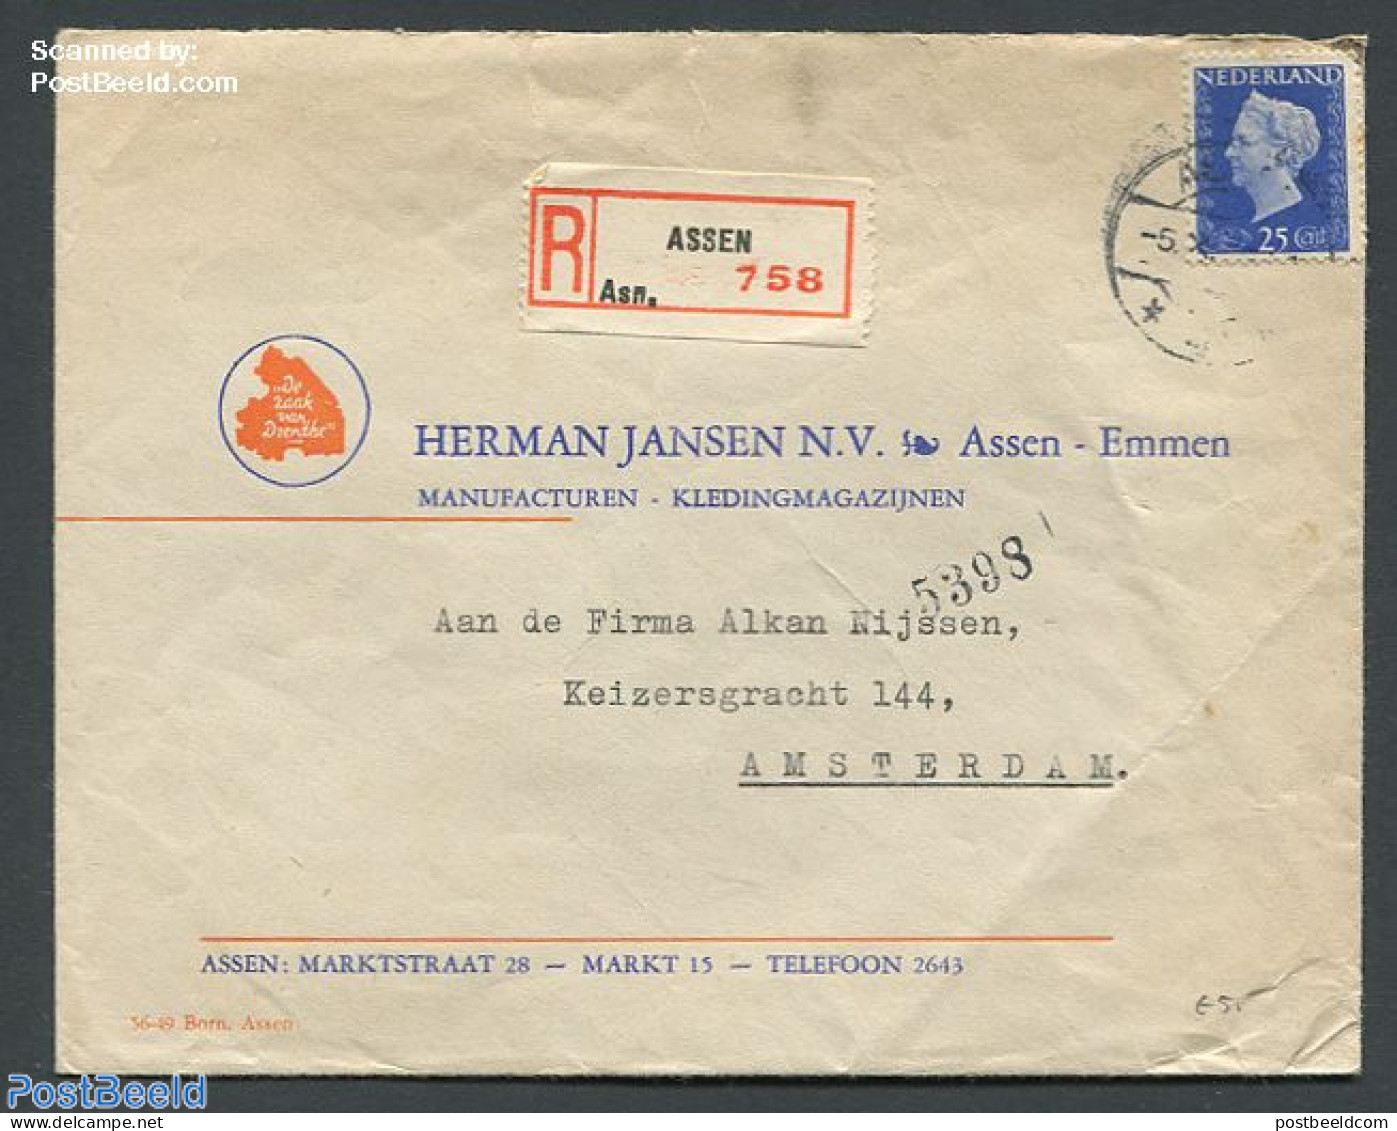 Netherlands 1947 Registered Cover Assen To Amsterdam With Nvhp 483, Postal History, History - Kings & Queens (Royalty) - Brieven En Documenten